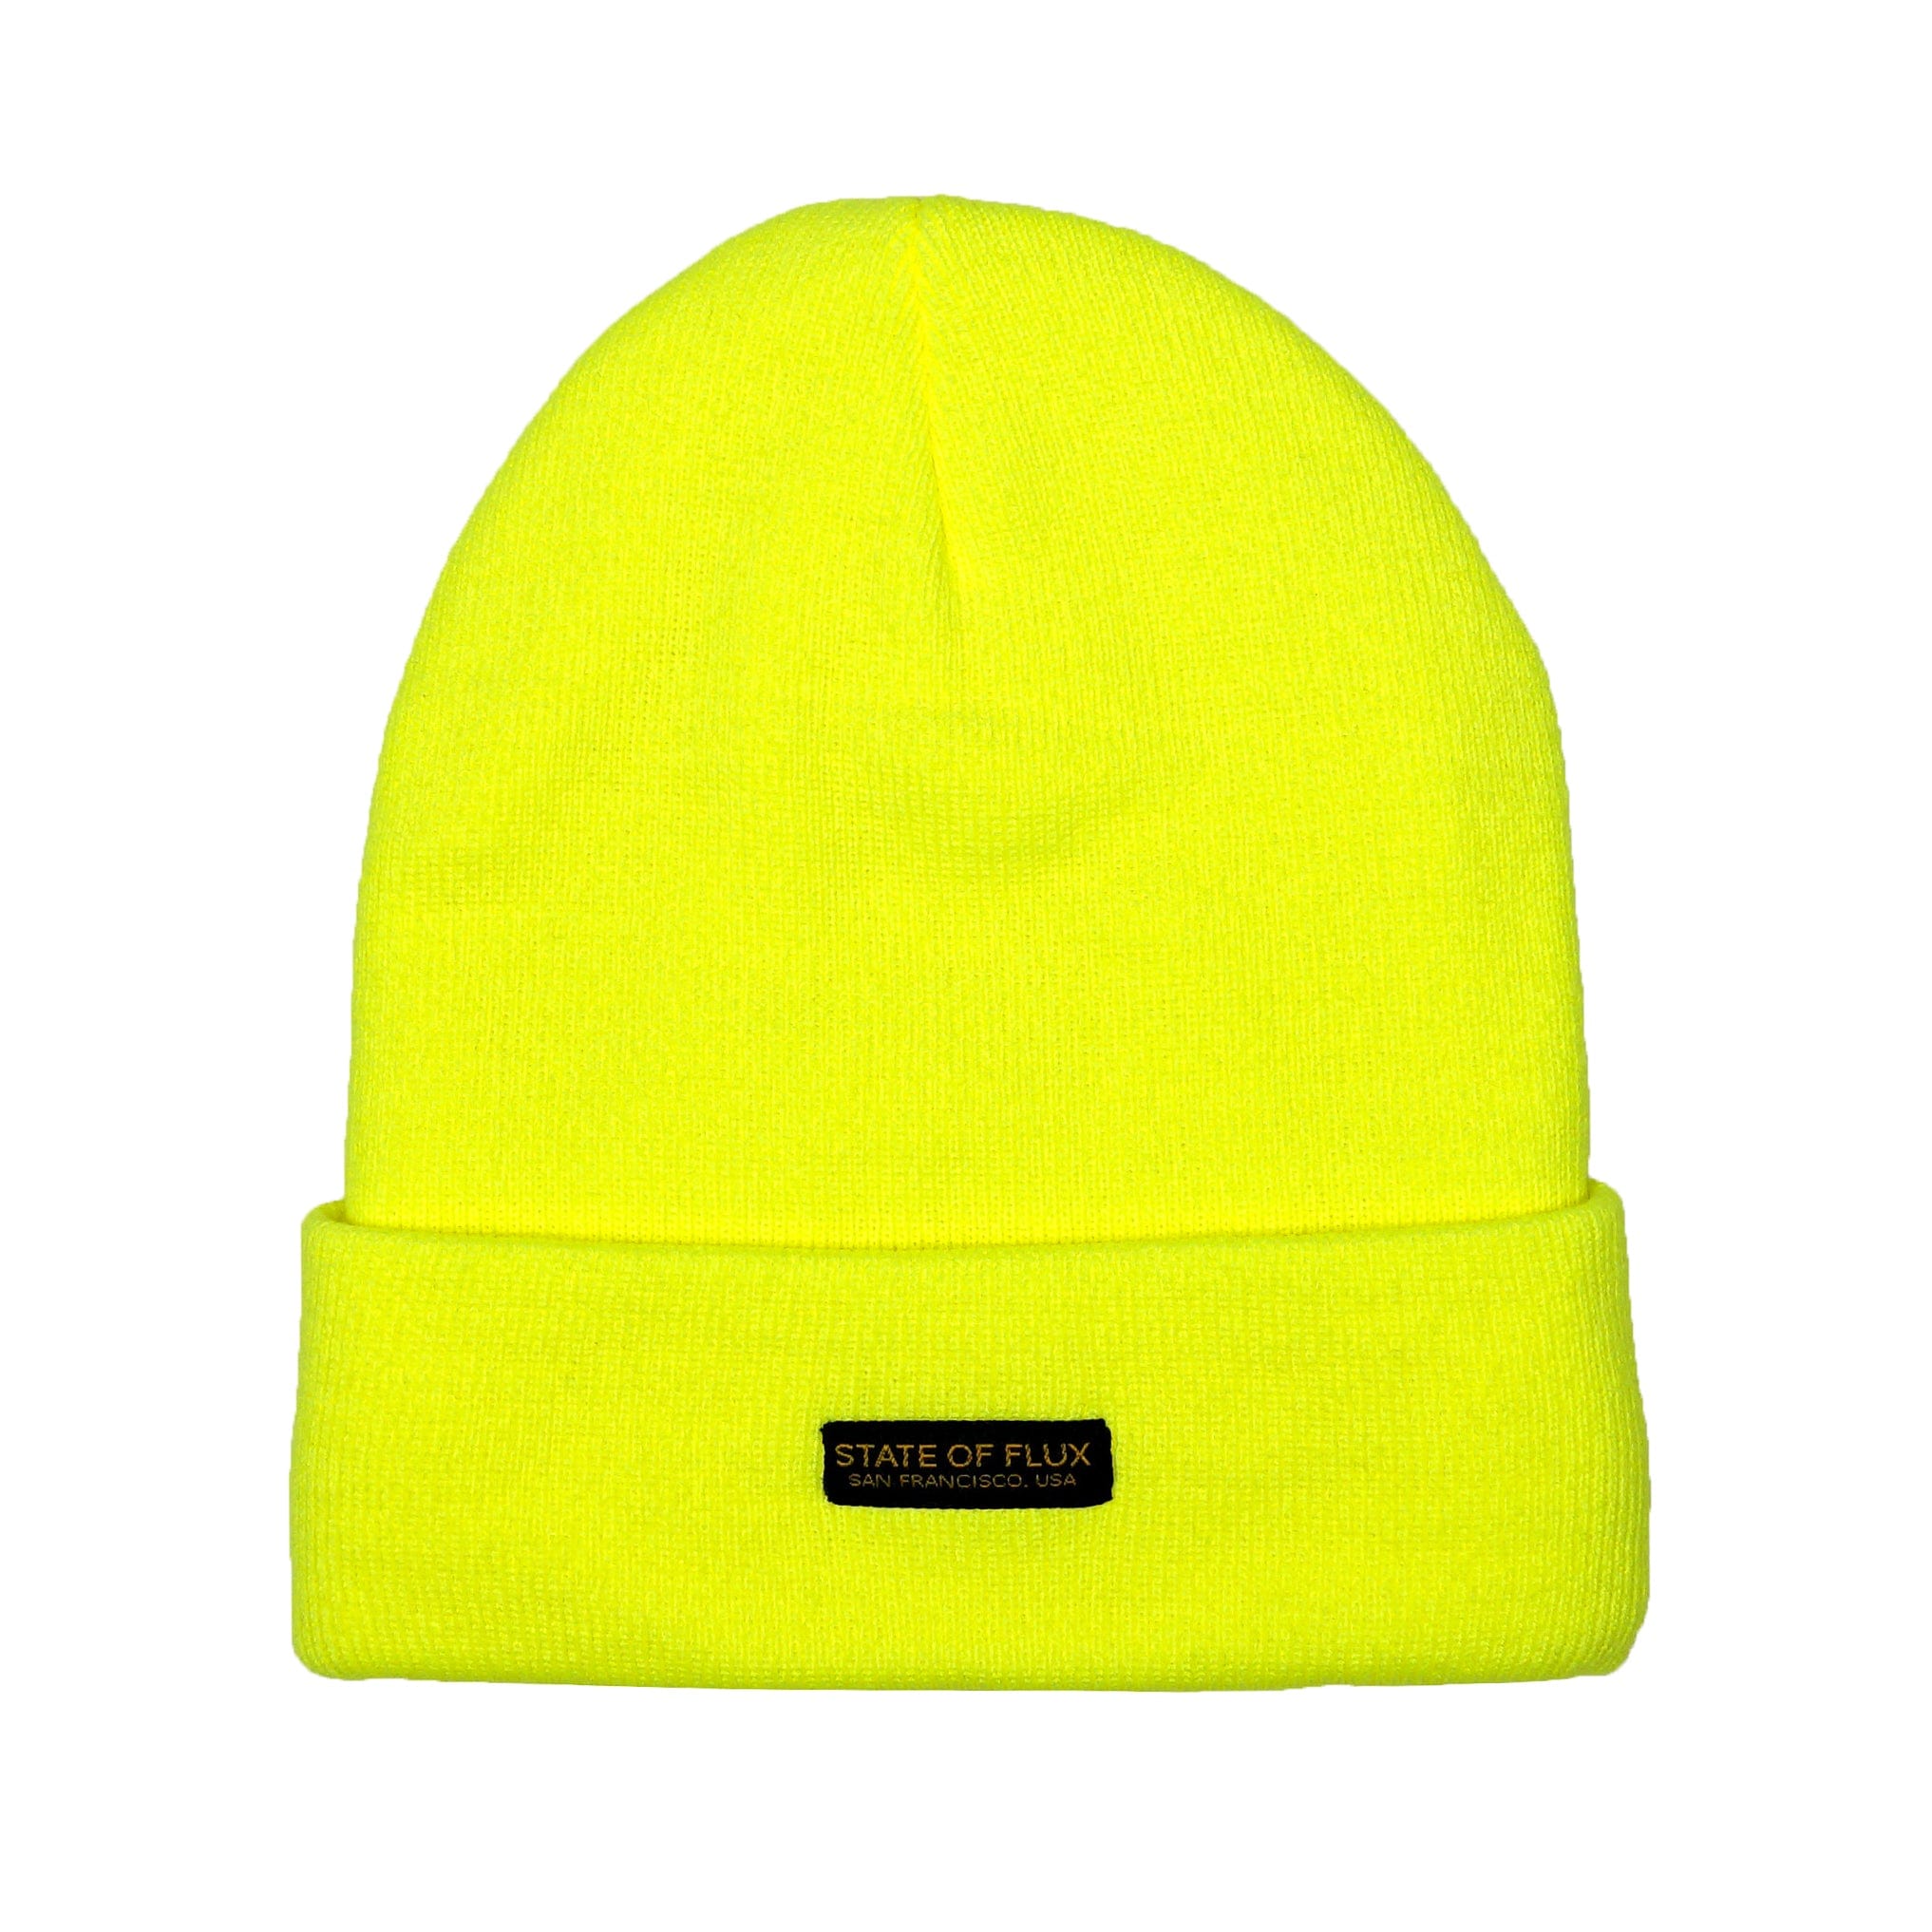 Insulated Mantra Beanie in neon yellow - State Of Flux - State Of Flux